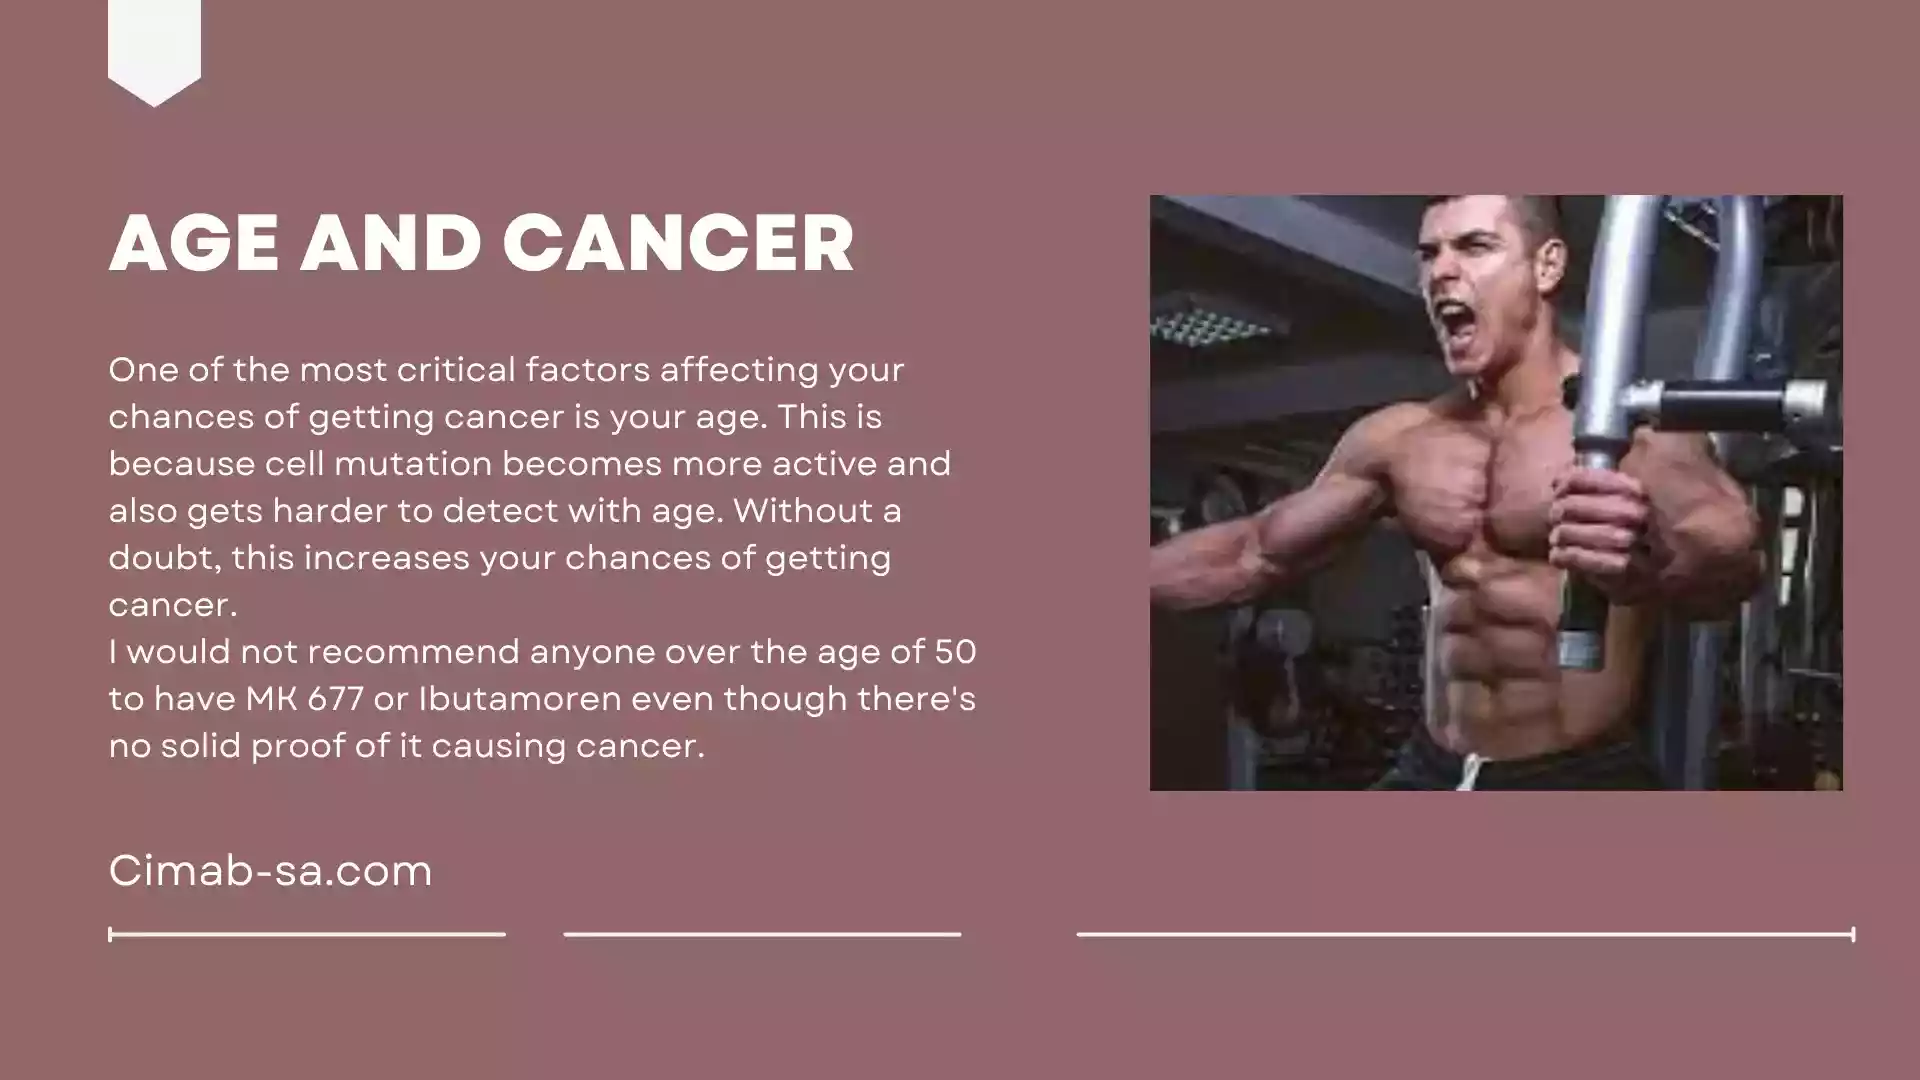 Age and cancer